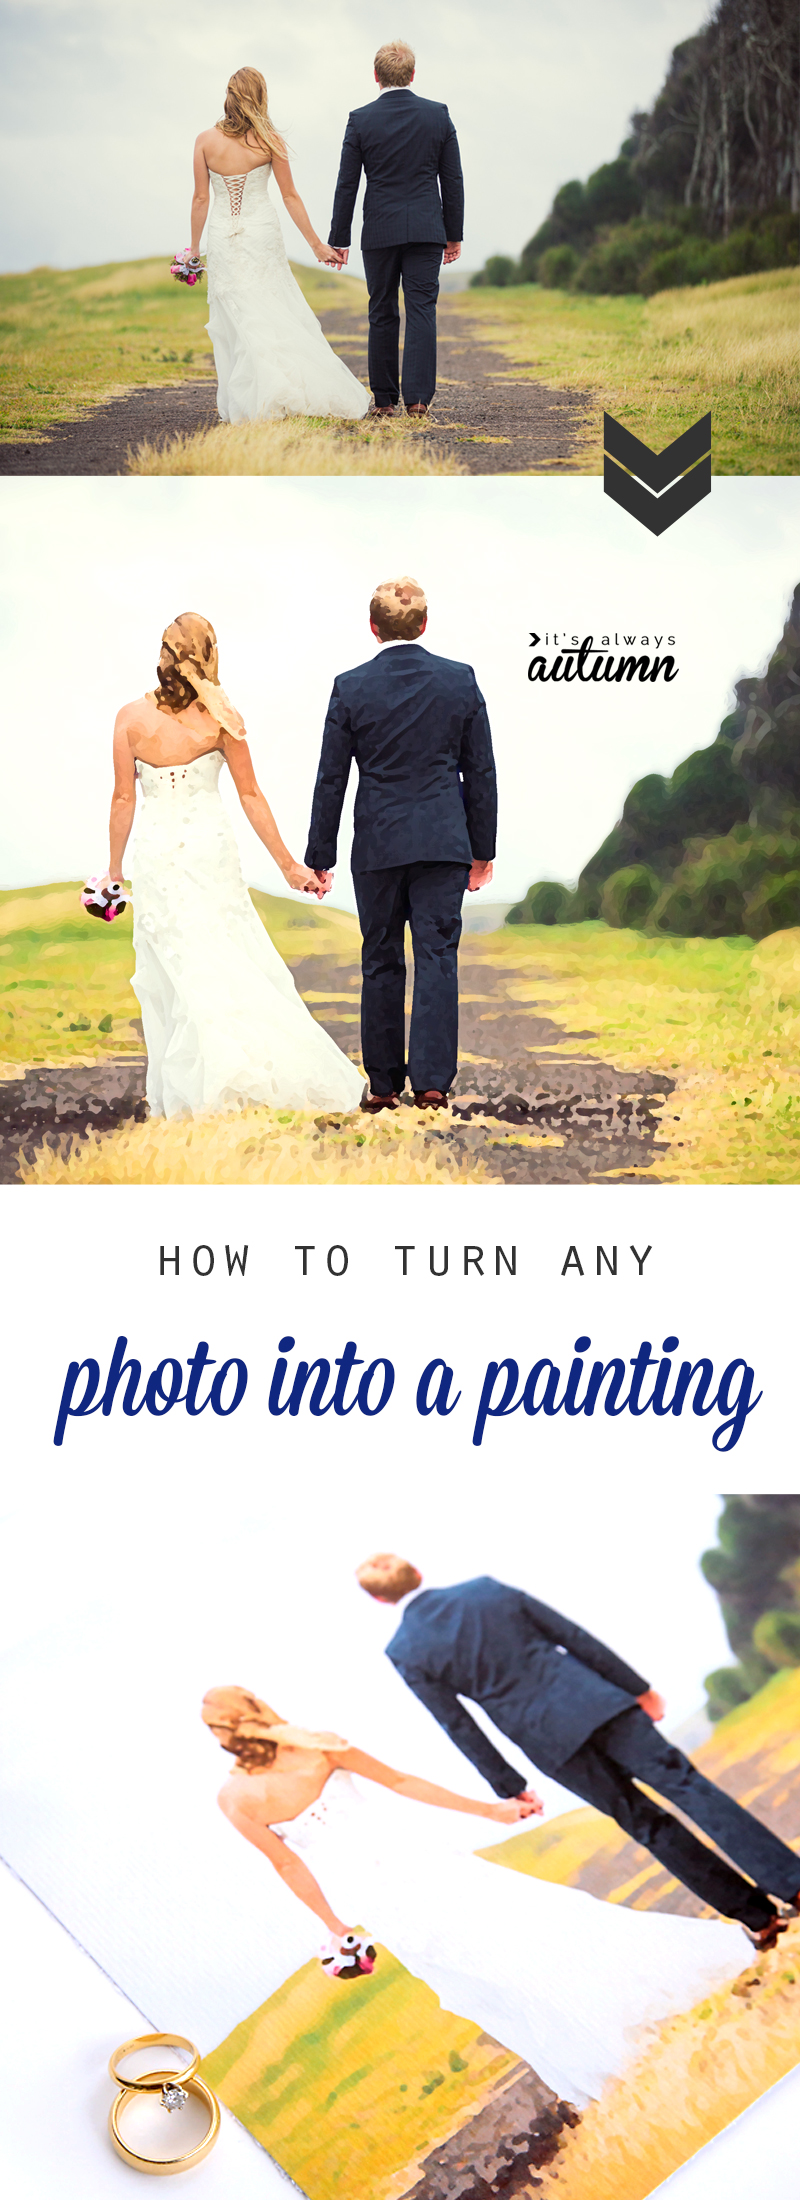 A photo man and a woman walking in the grass turned into a painting